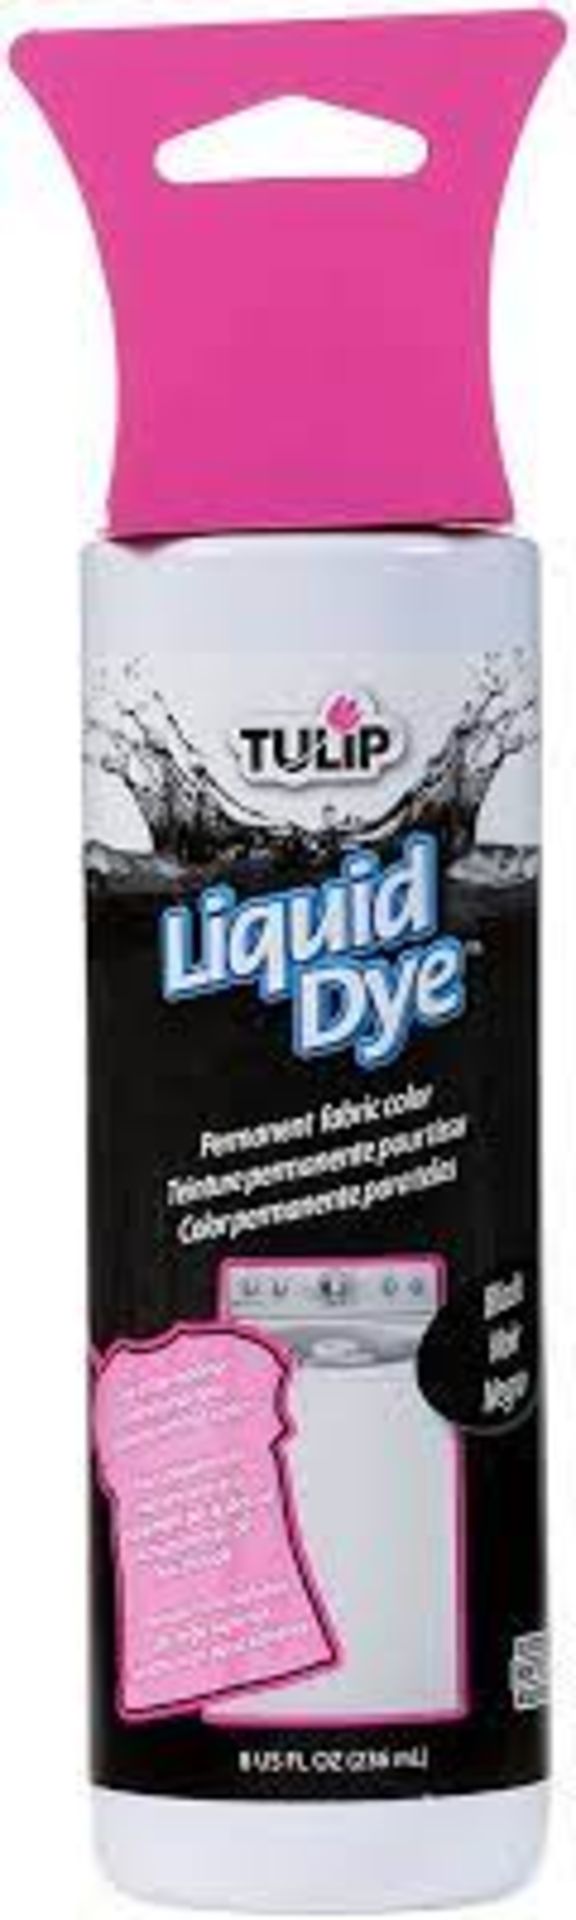 2664 X BRAND NEW TULIP LIQUID DYE IN VARIOUS COLOURS TOTAL RRP £29304